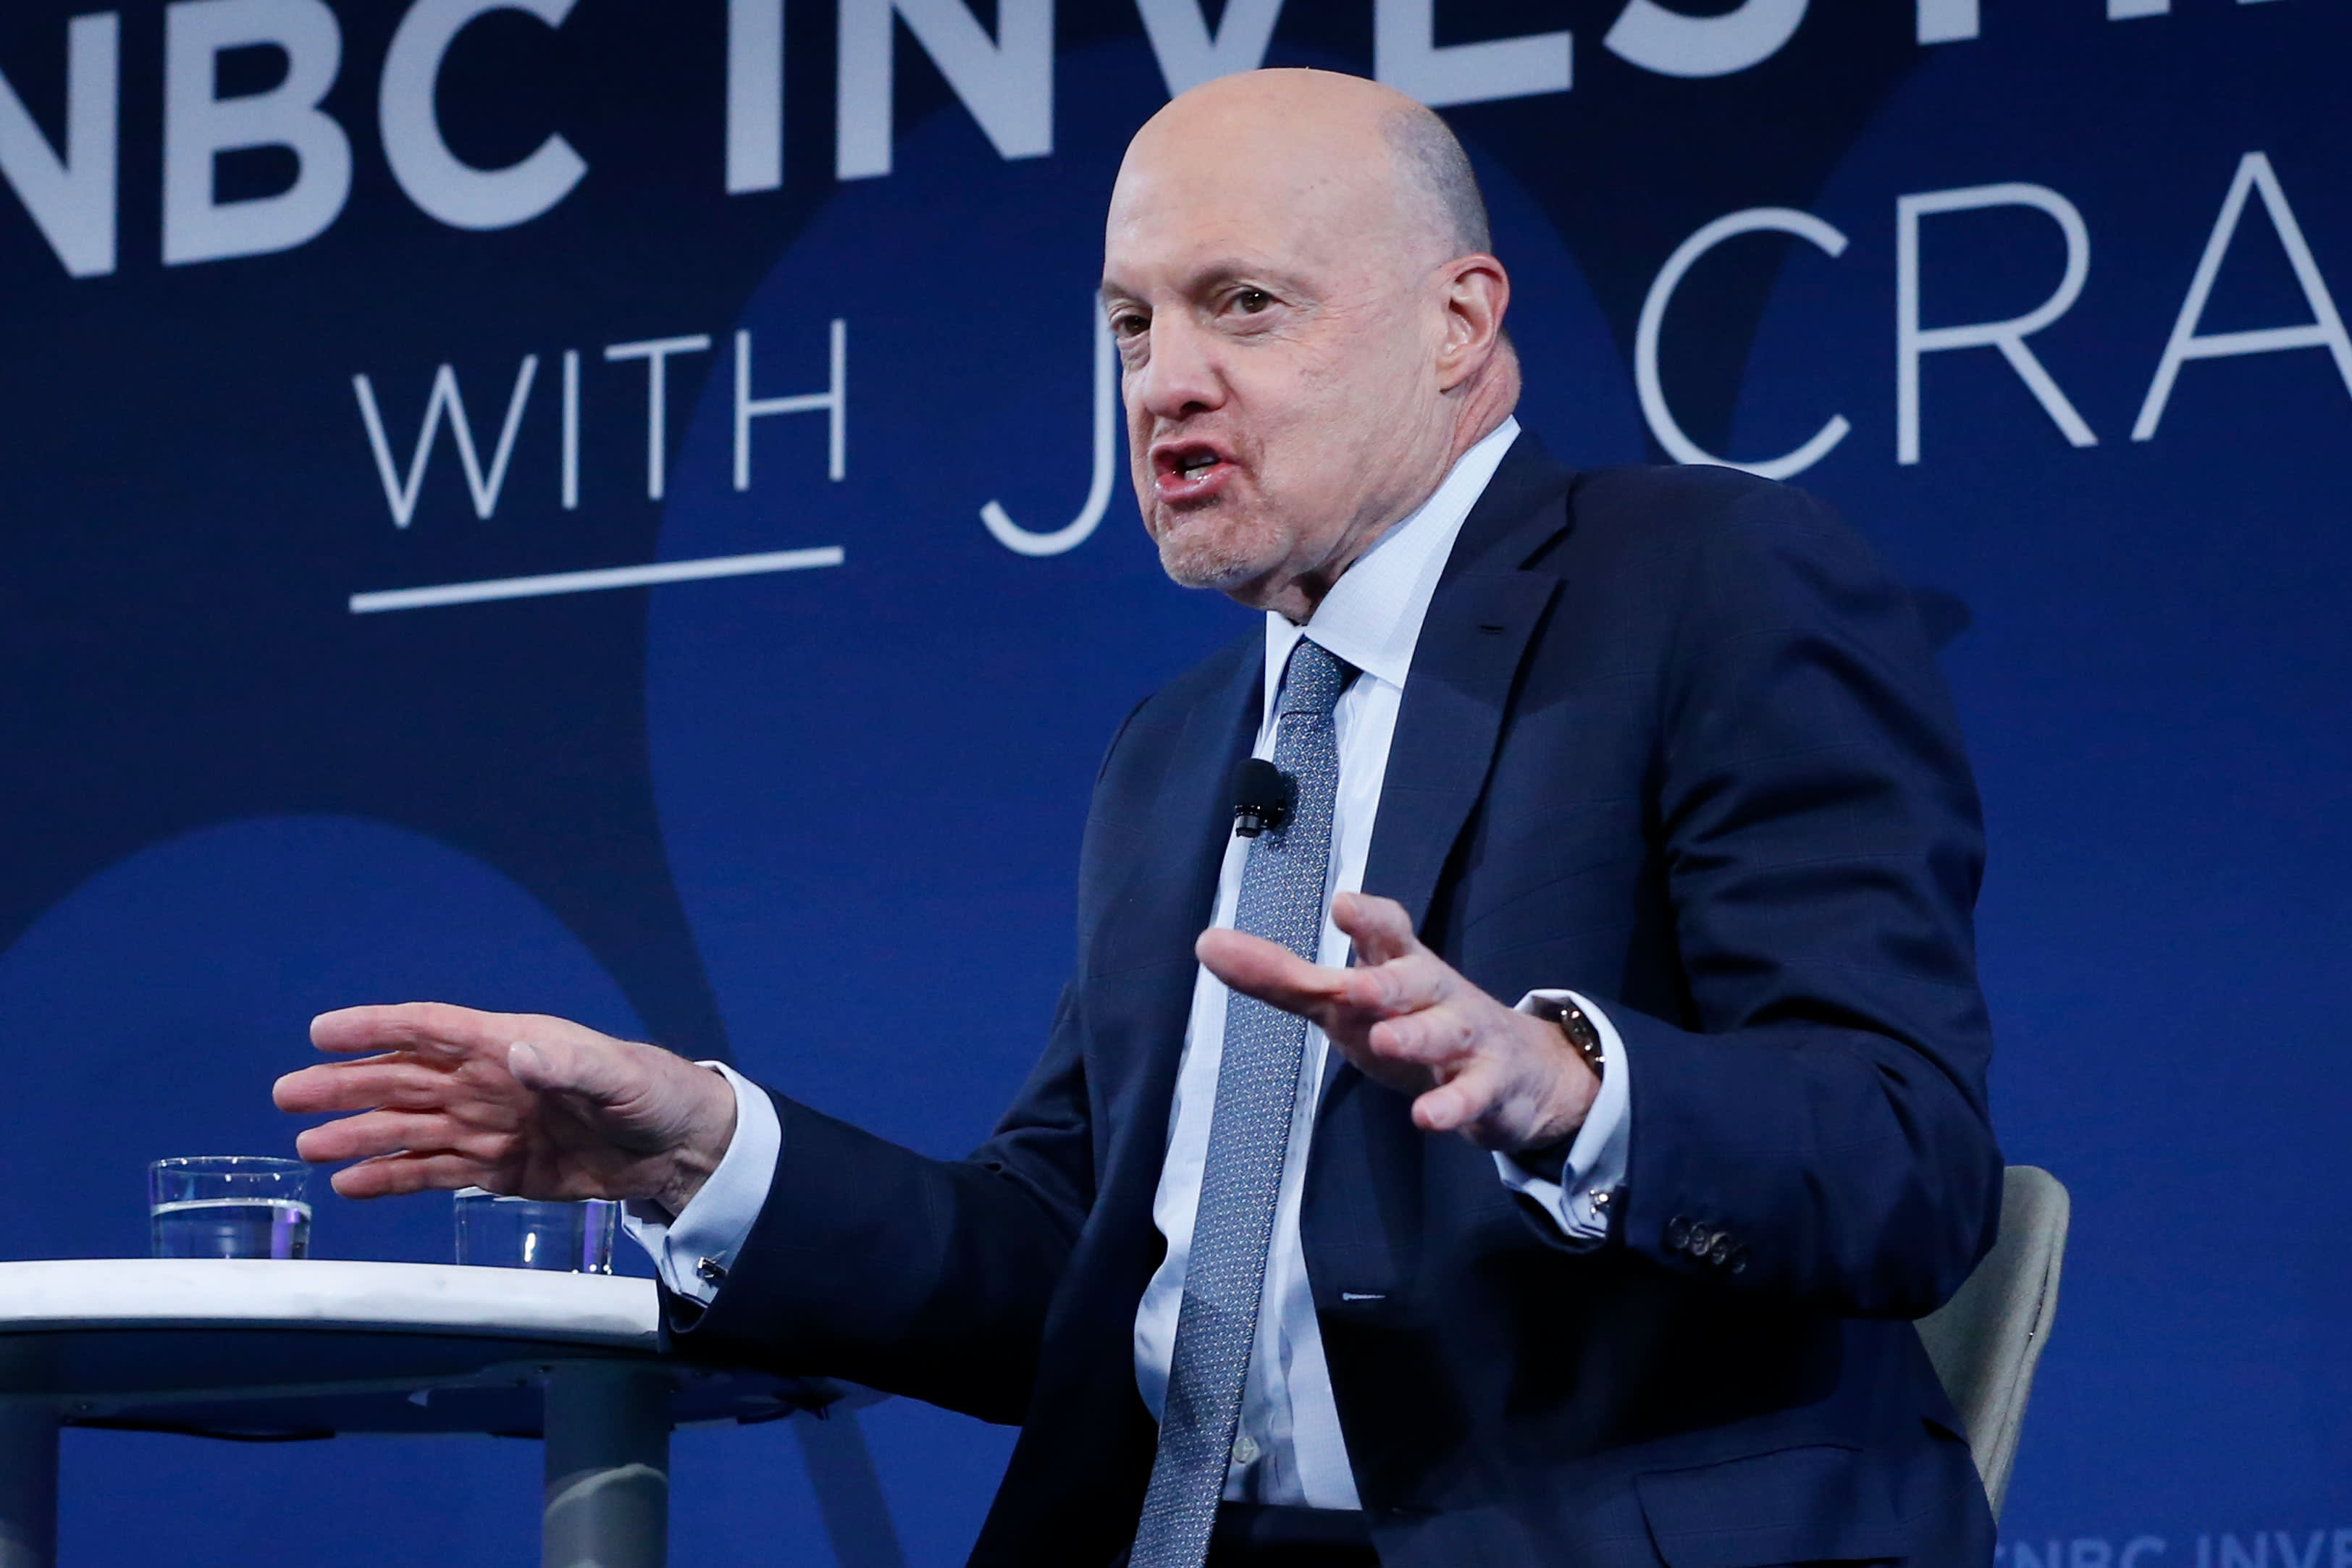 'If it gets hit, we'll buy more,' Jim Cramer says of this cybersecurity firm 